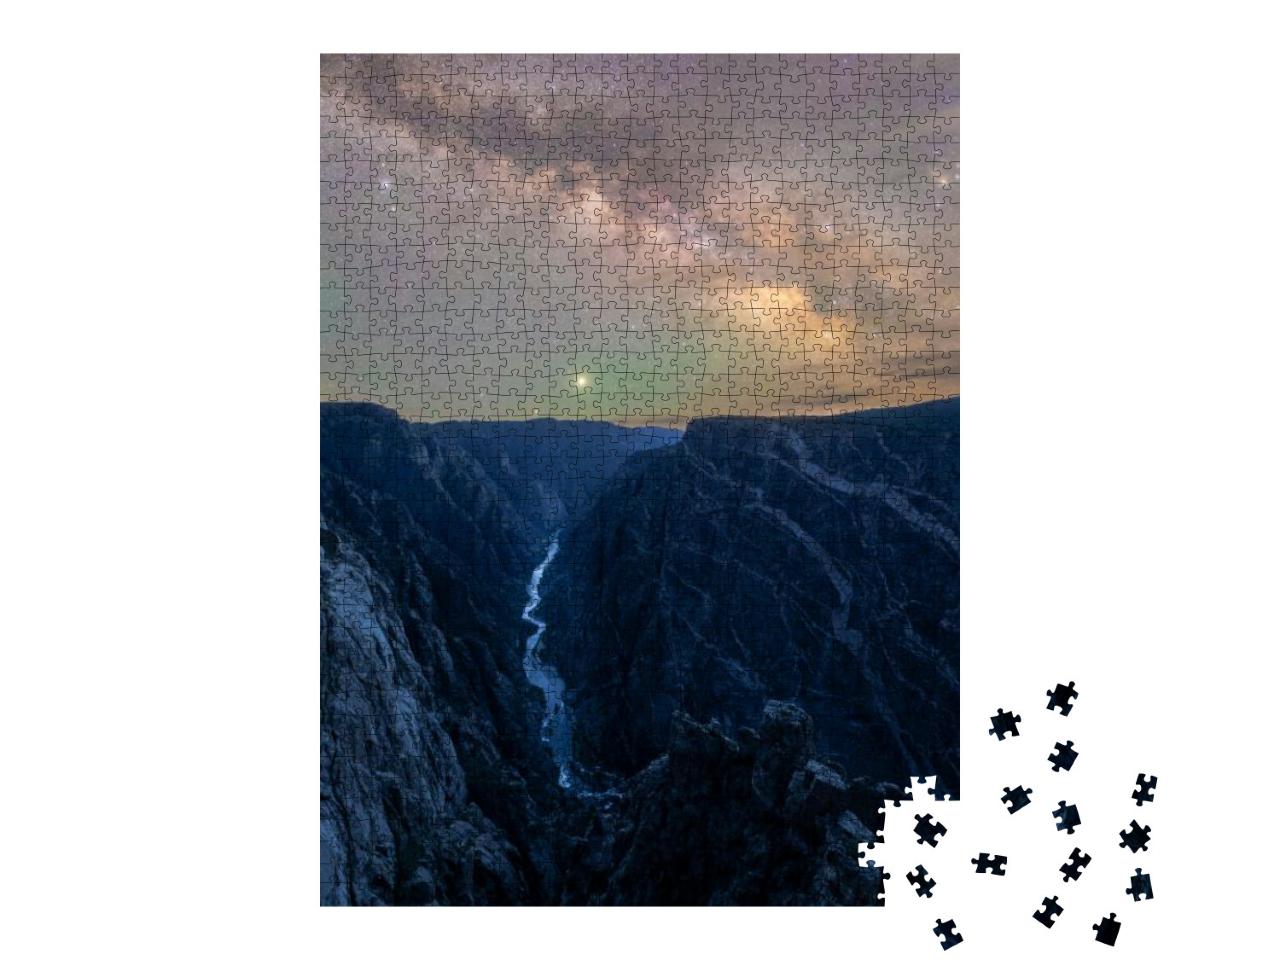 Milky Way Exposure Over Black Canyon of the Gunnison Nati... Jigsaw Puzzle with 1000 pieces